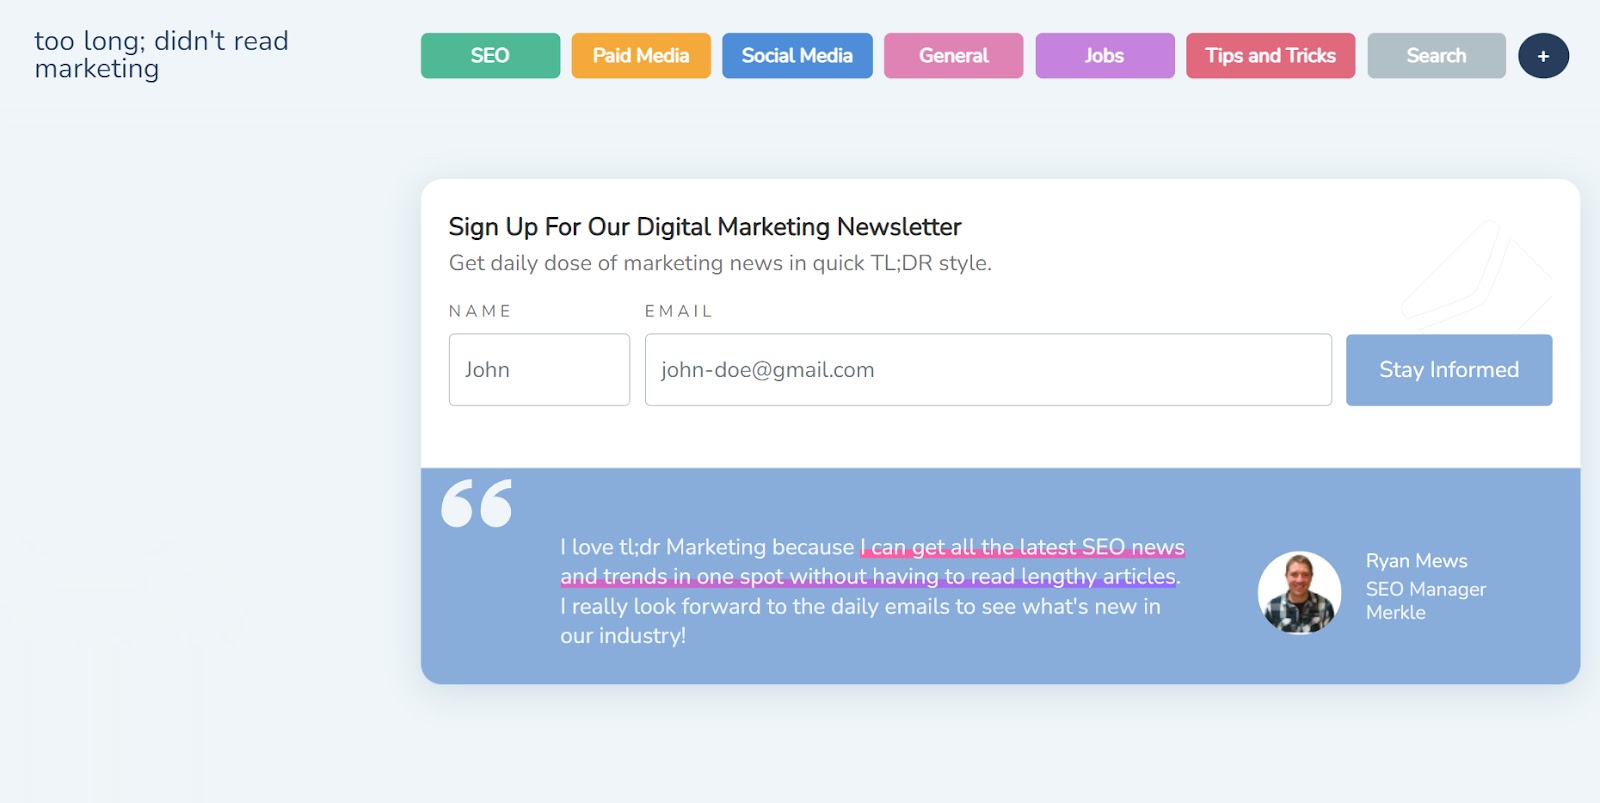 TL;DR Marketing sign up page